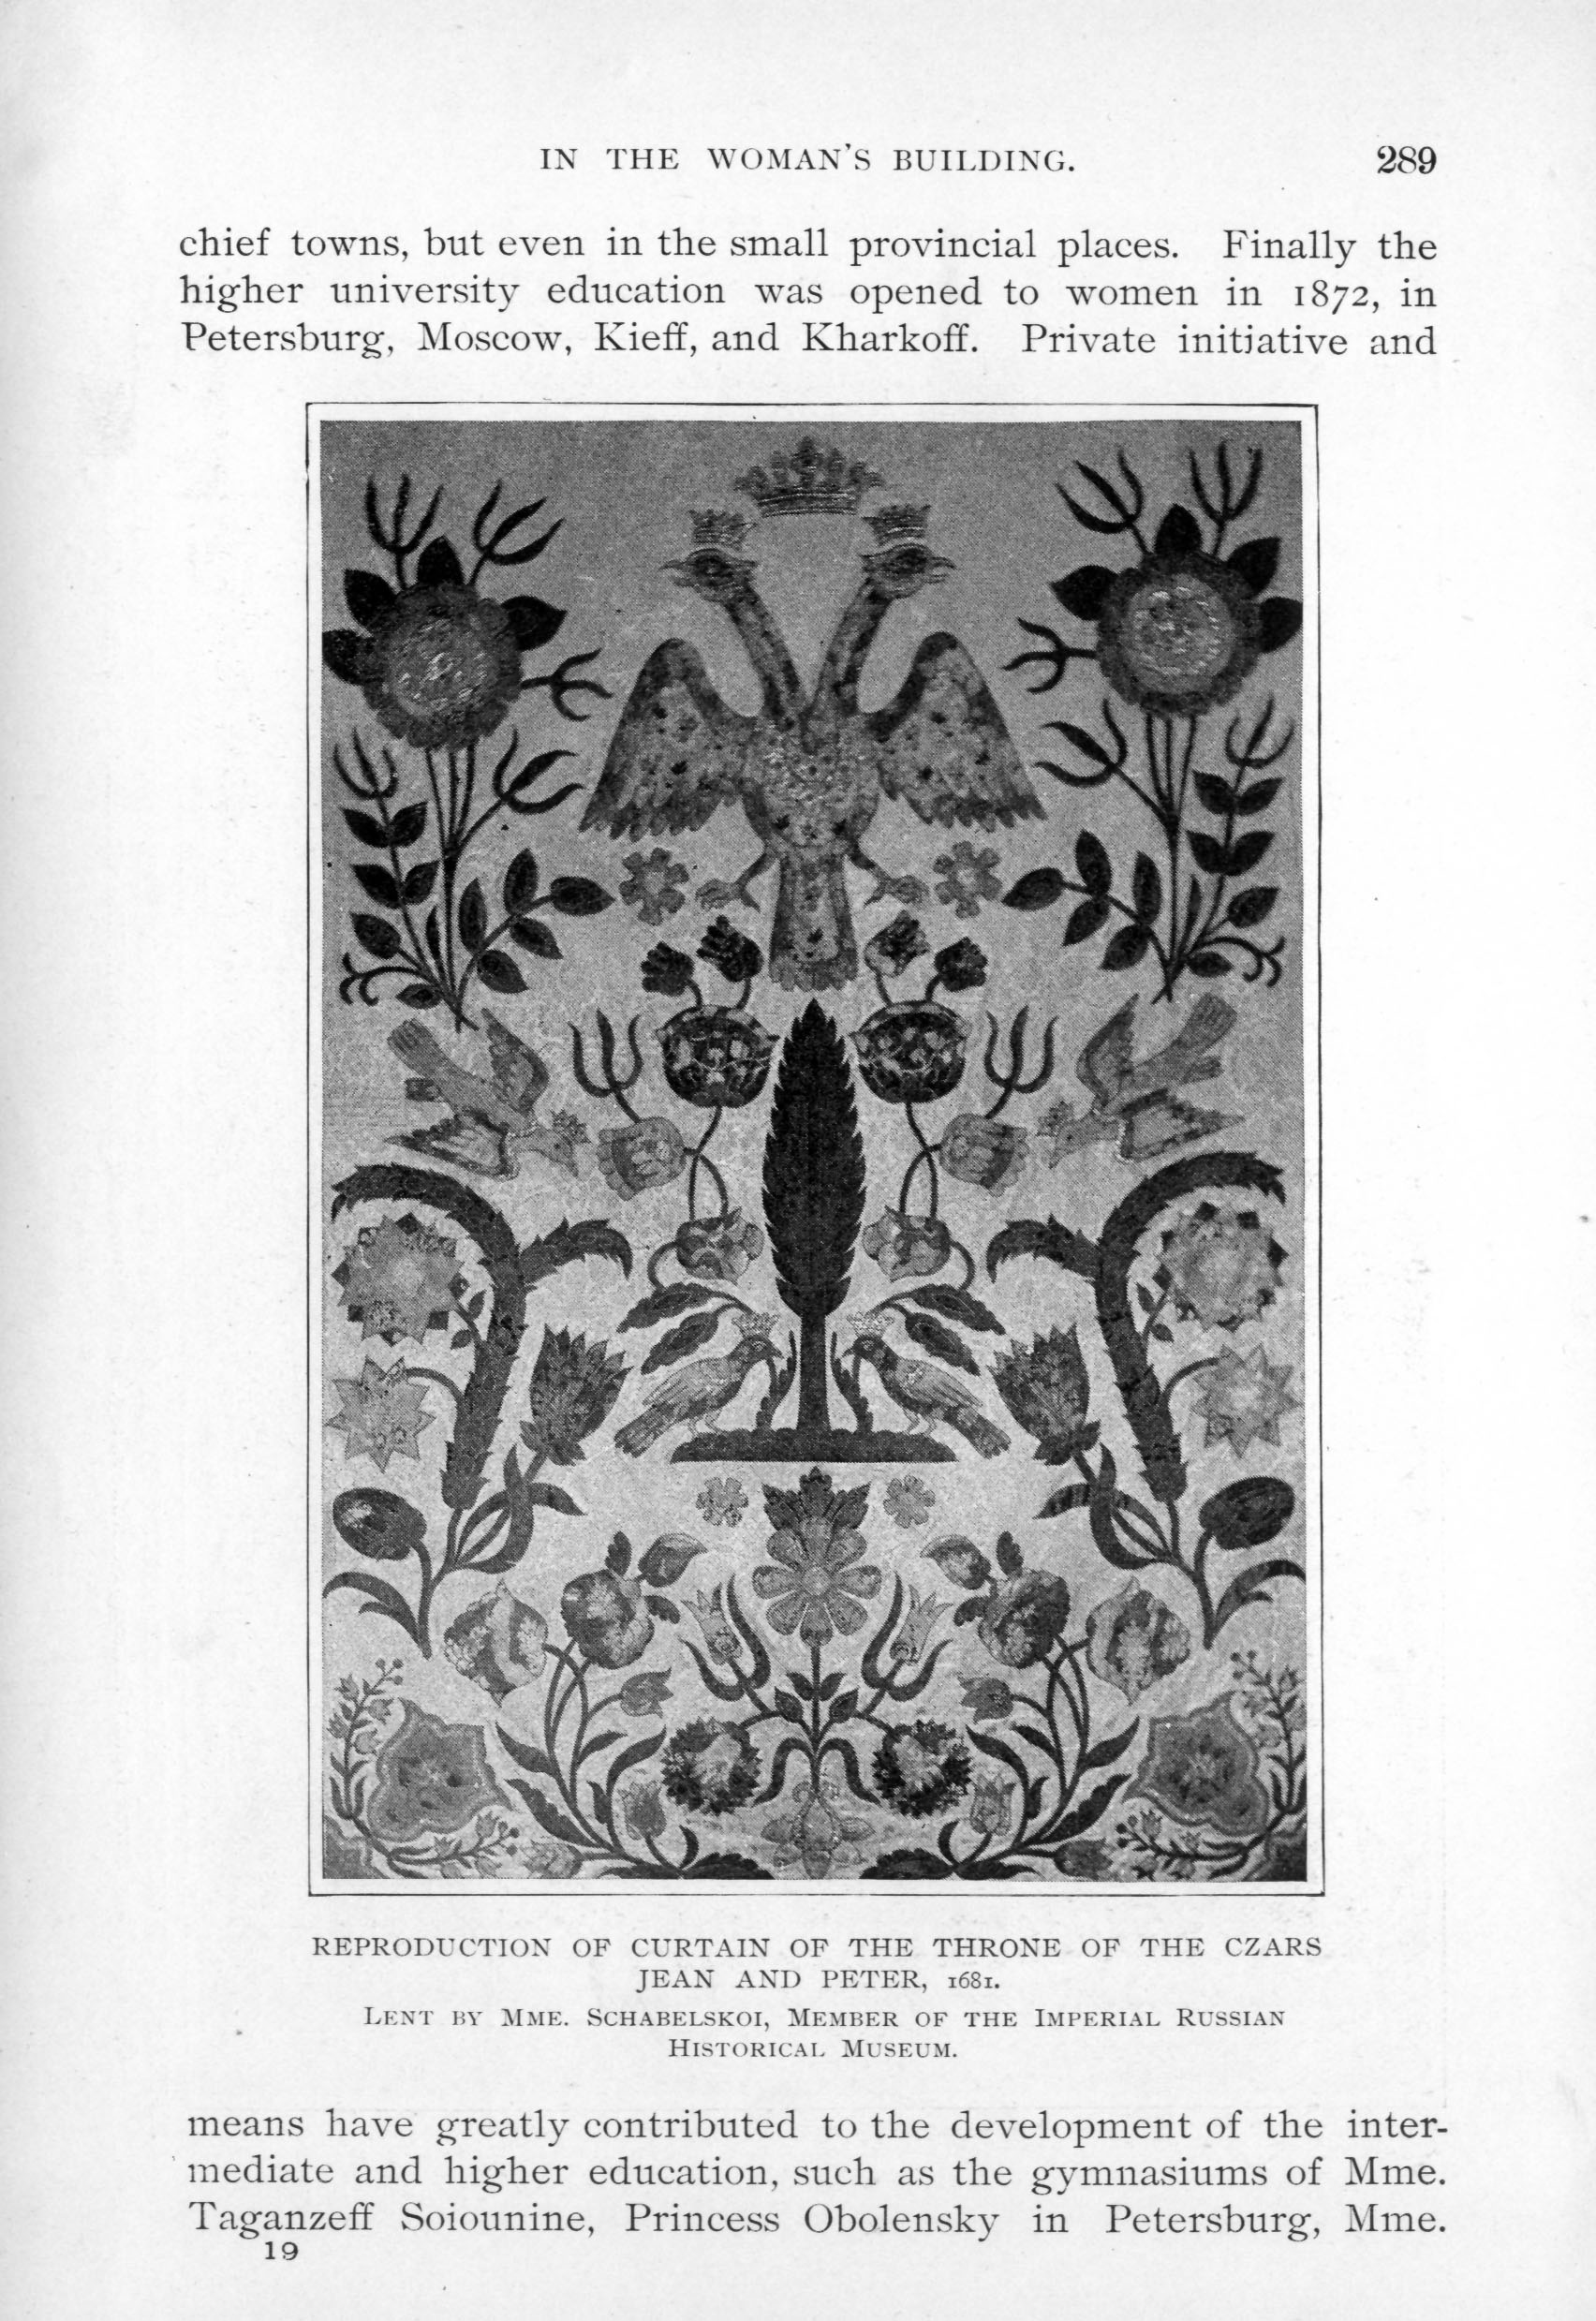 curtain embroidered with iconography from  coat of arms of Russia - a two-headed eagle - also flowers and other birds